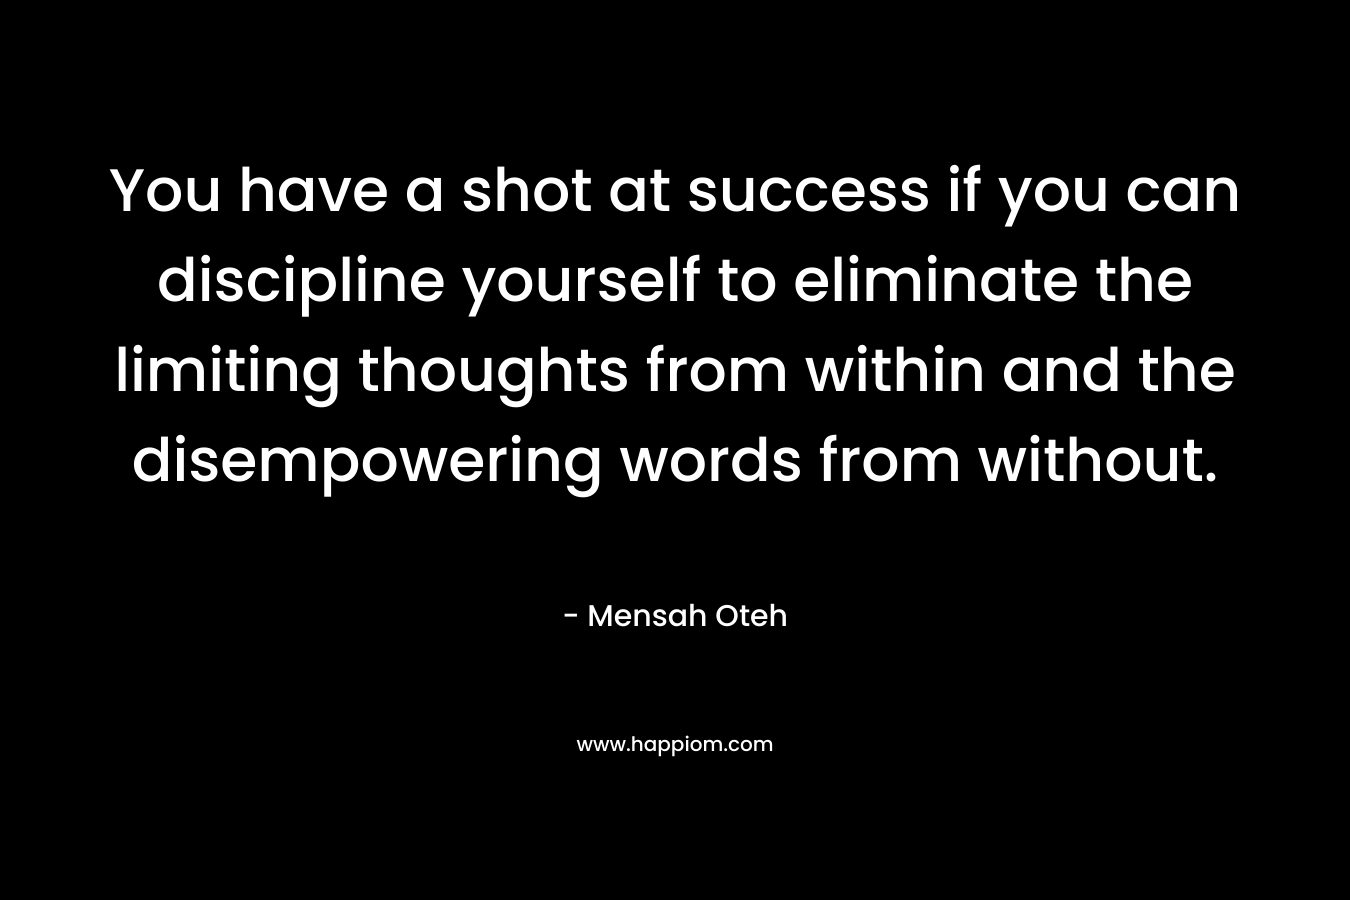 You have a shot at success if you can discipline yourself to eliminate the limiting thoughts from within and the disempowering words from without.